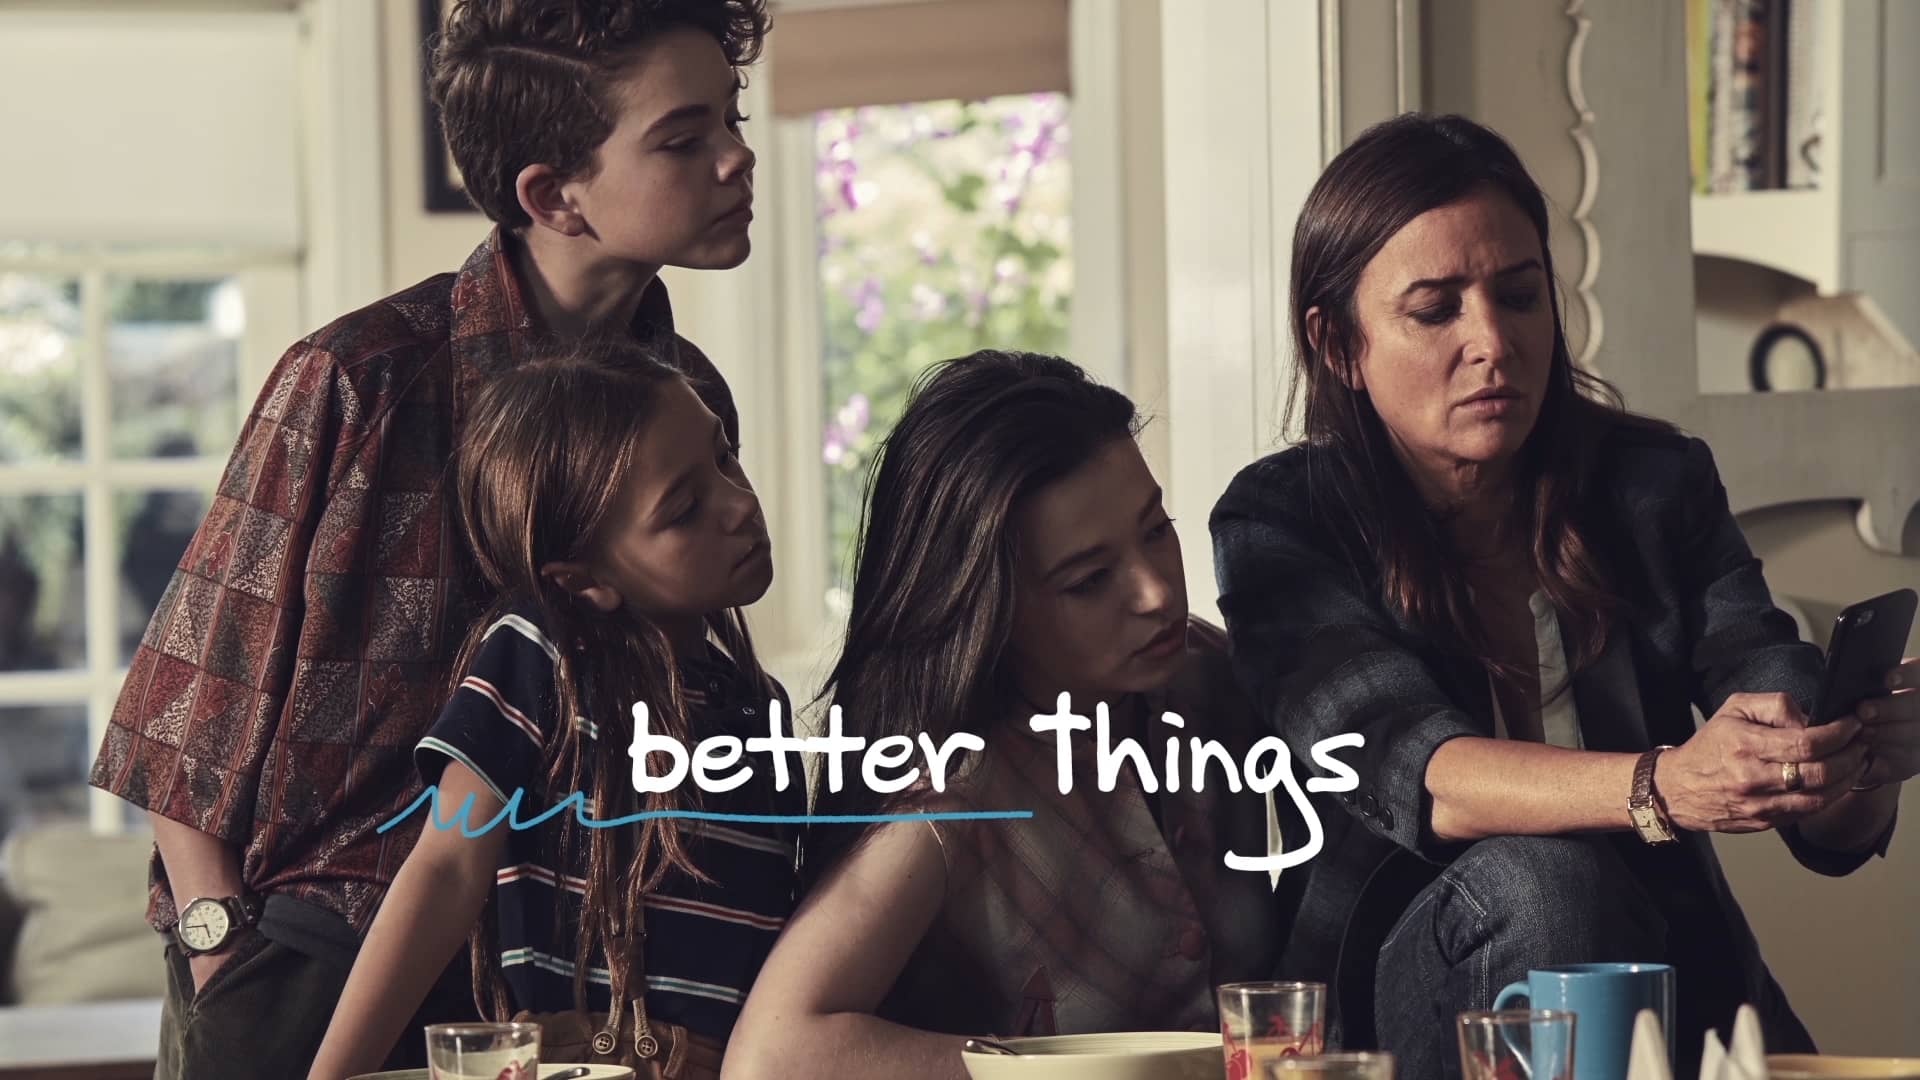 Better Things TV Series - Tantalizing preview, Intriguing glimpse, Exciting storyline, Captivating visuals, 1920x1080 Full HD Desktop